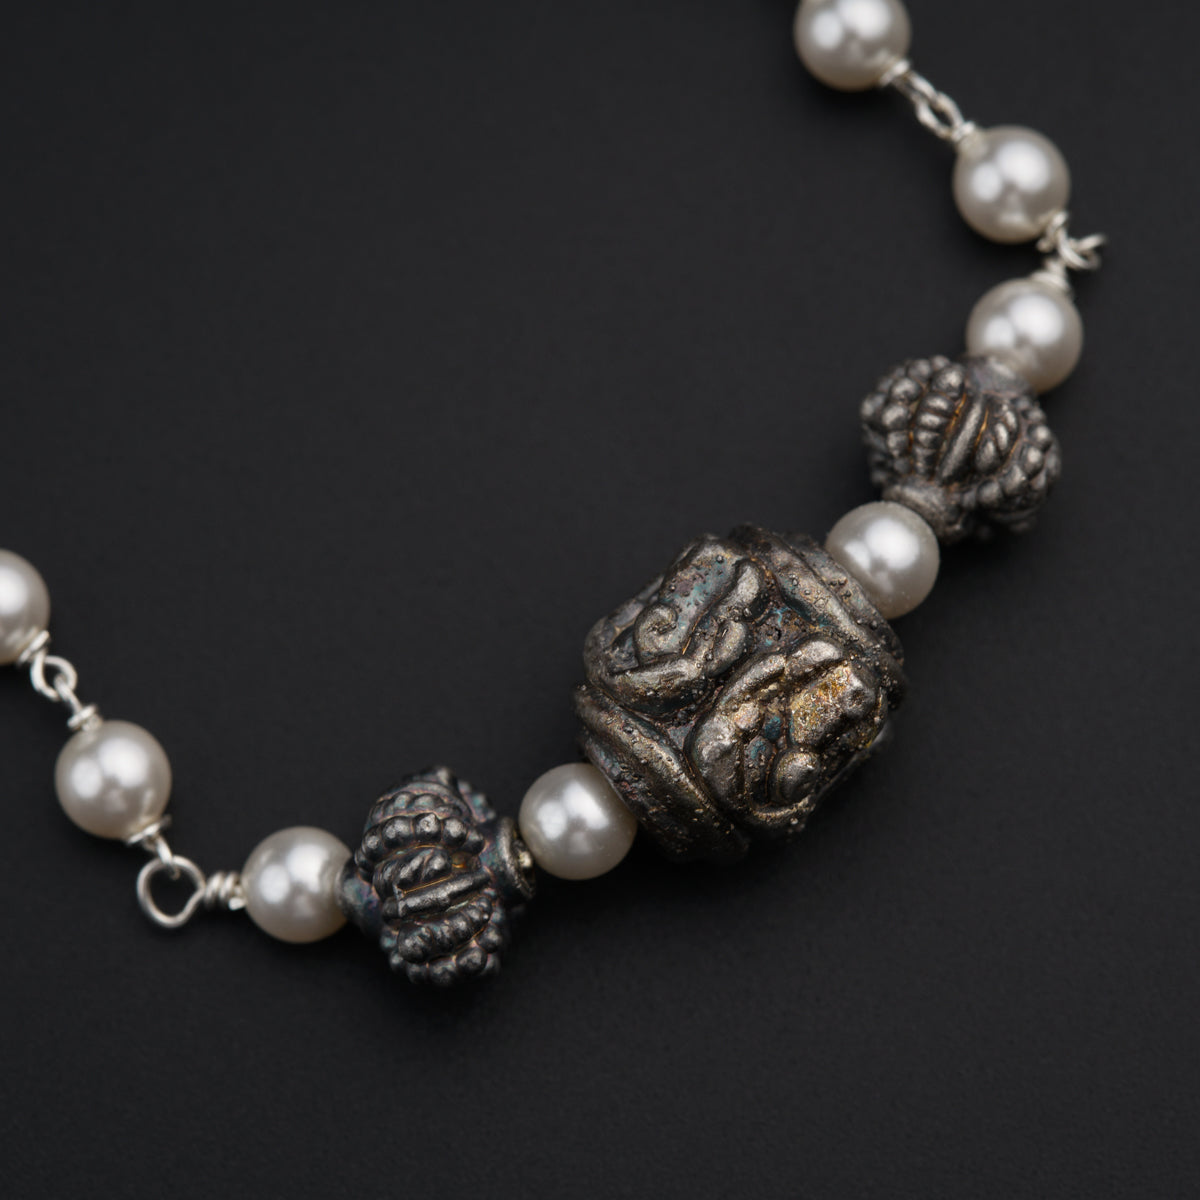 a silver bracelet with pearls and beads on a black surface